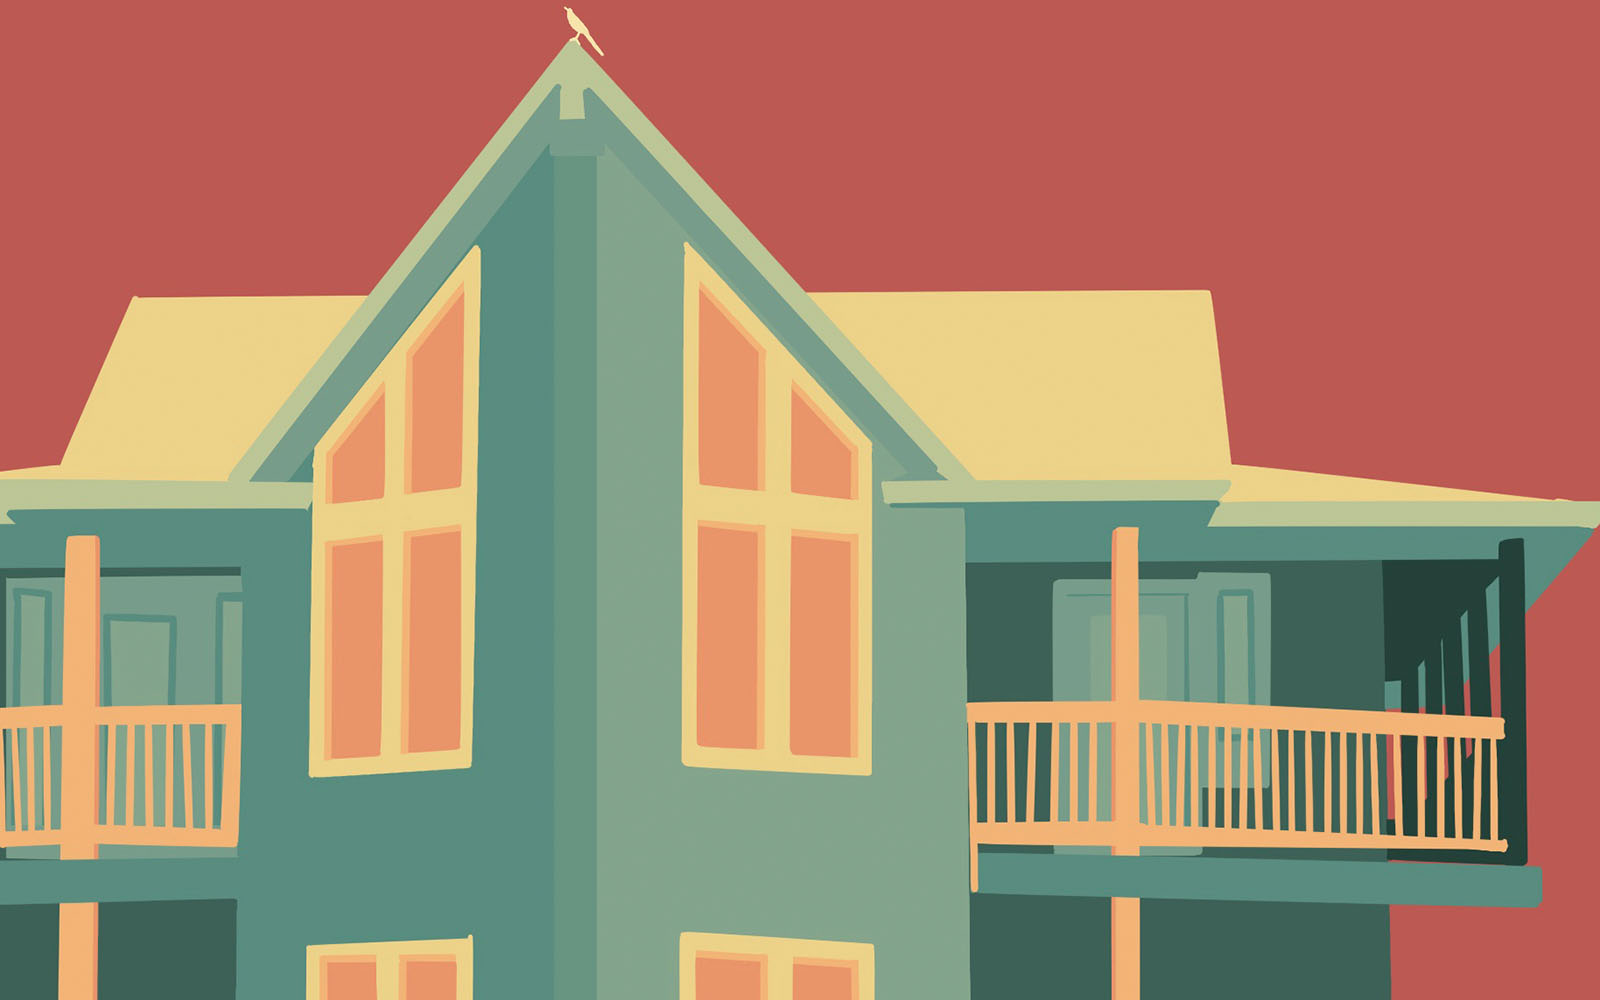 Digital illustration of a blue, yellow and pink house with a bird on the gable.